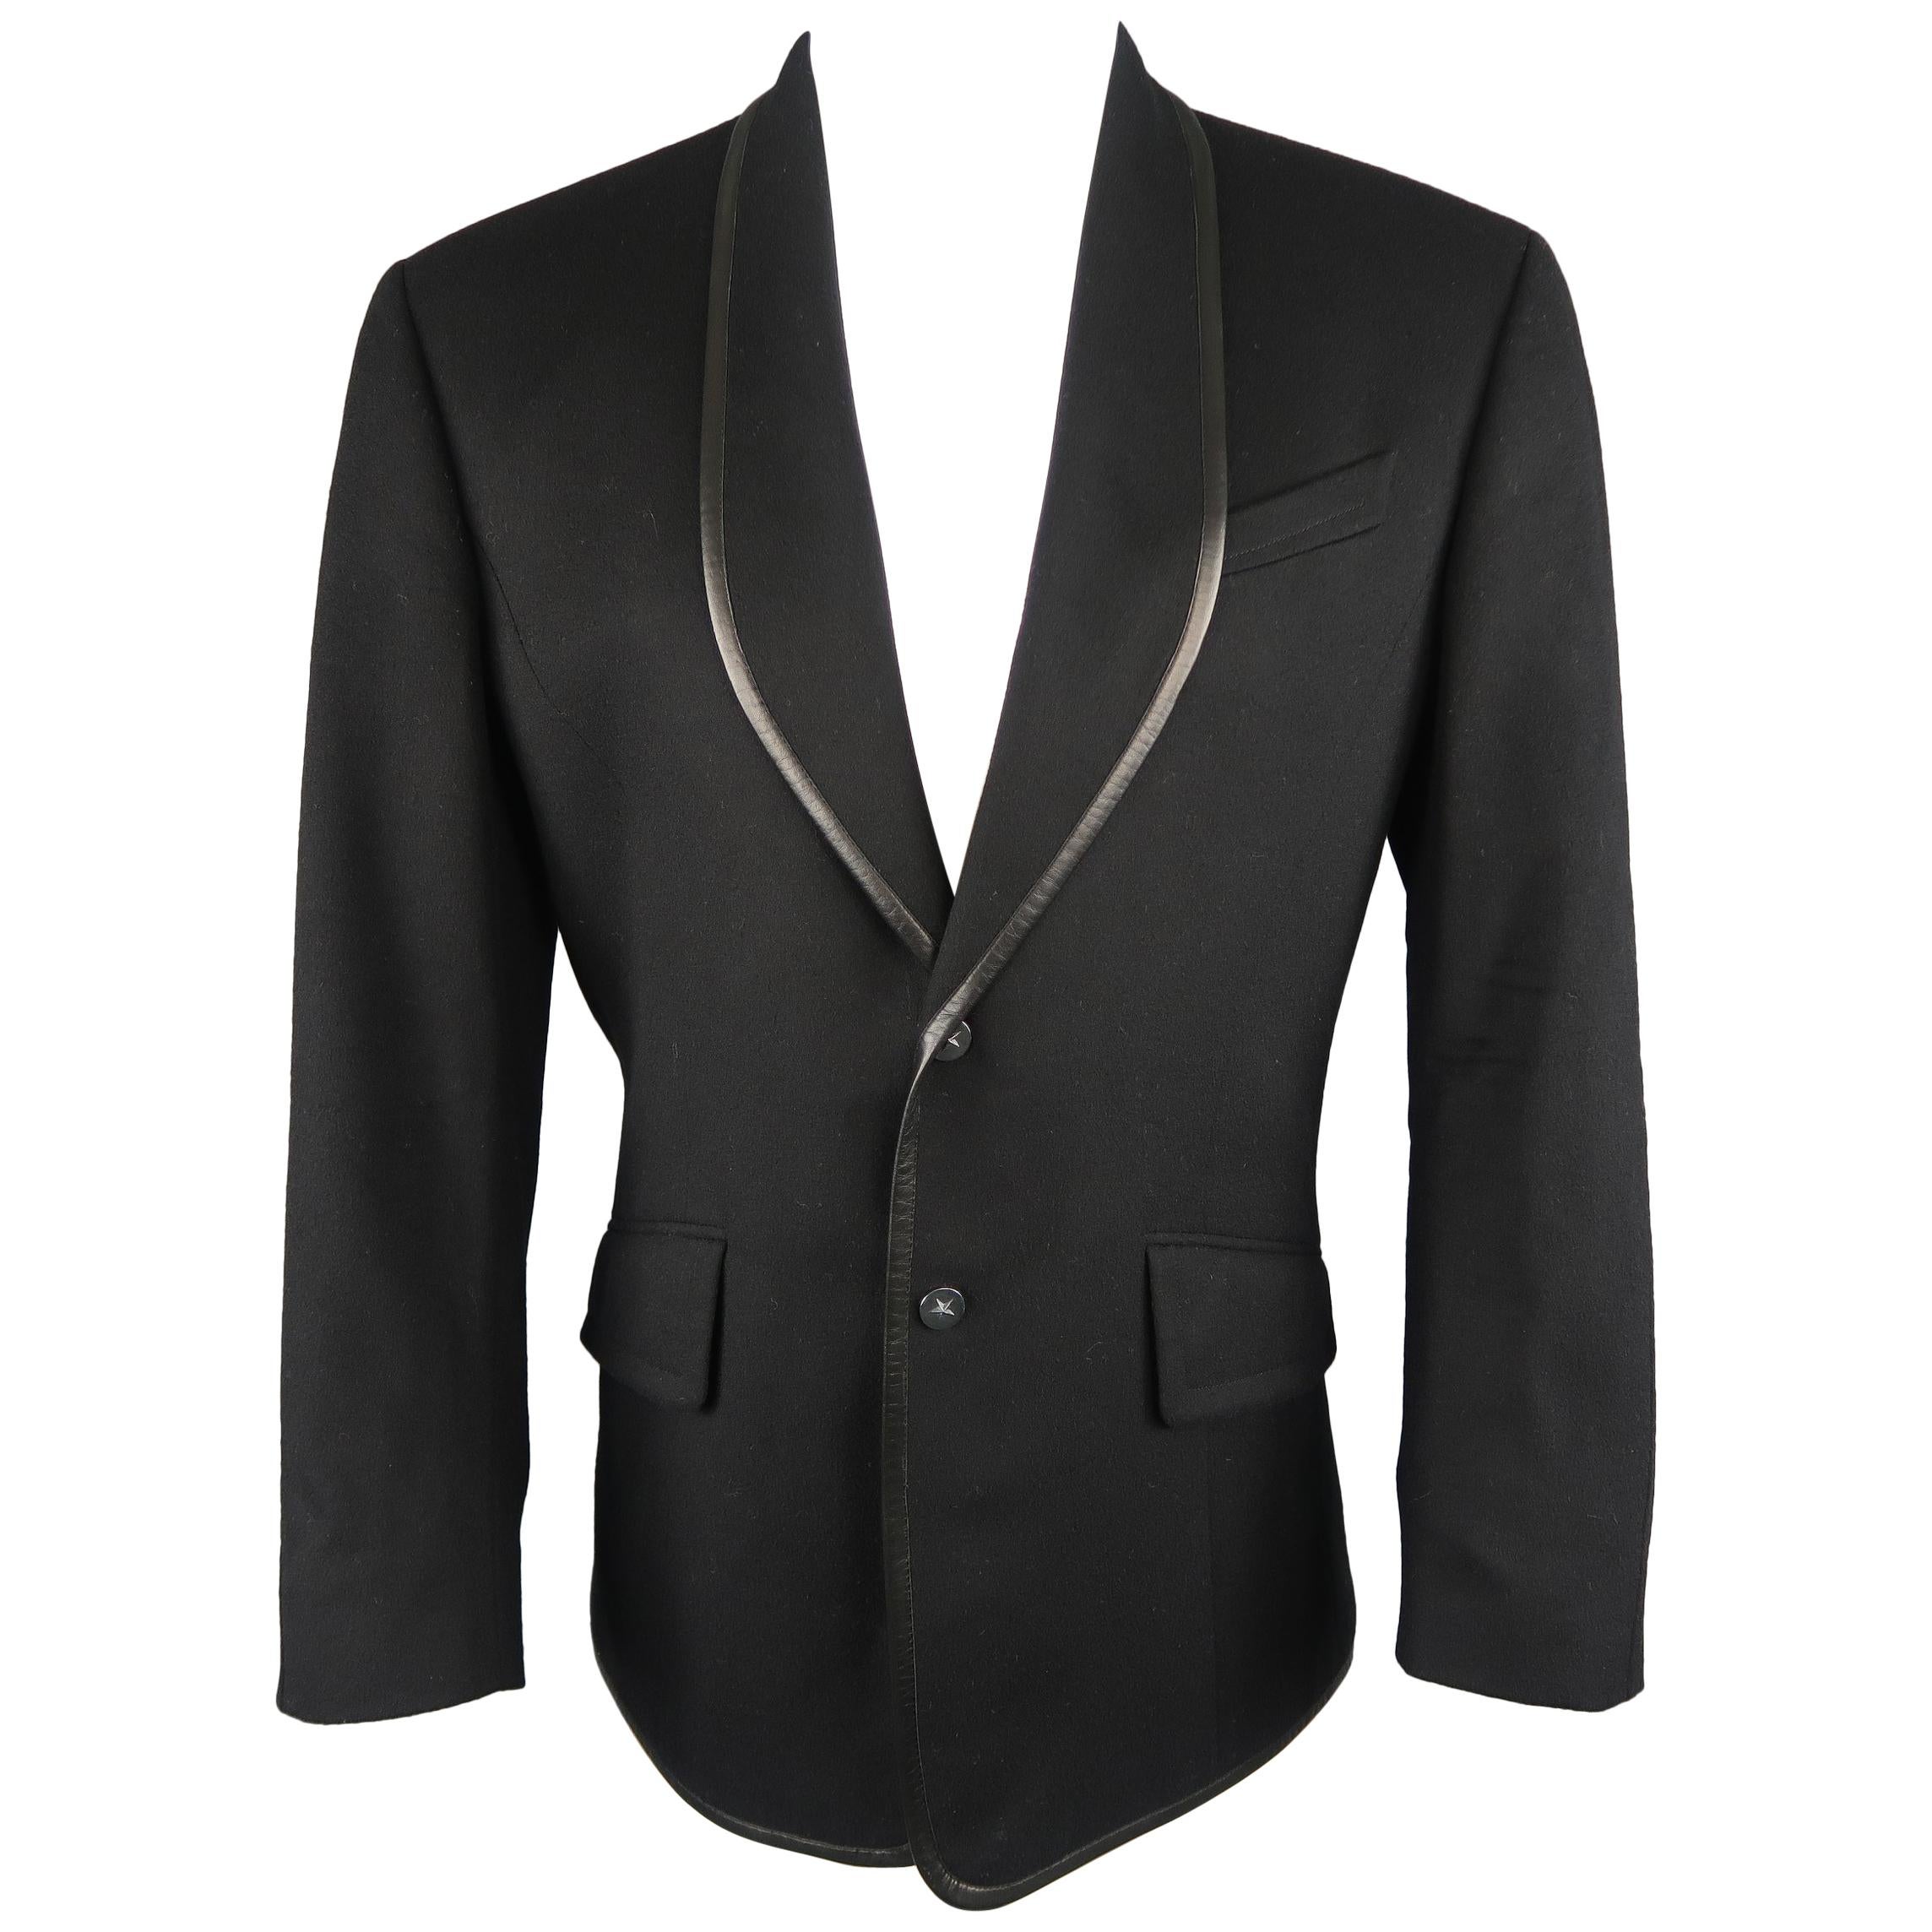 Thierry Mugler Black Wool / Cashmere Leather Trimmed Shawl Collar Sport Coat